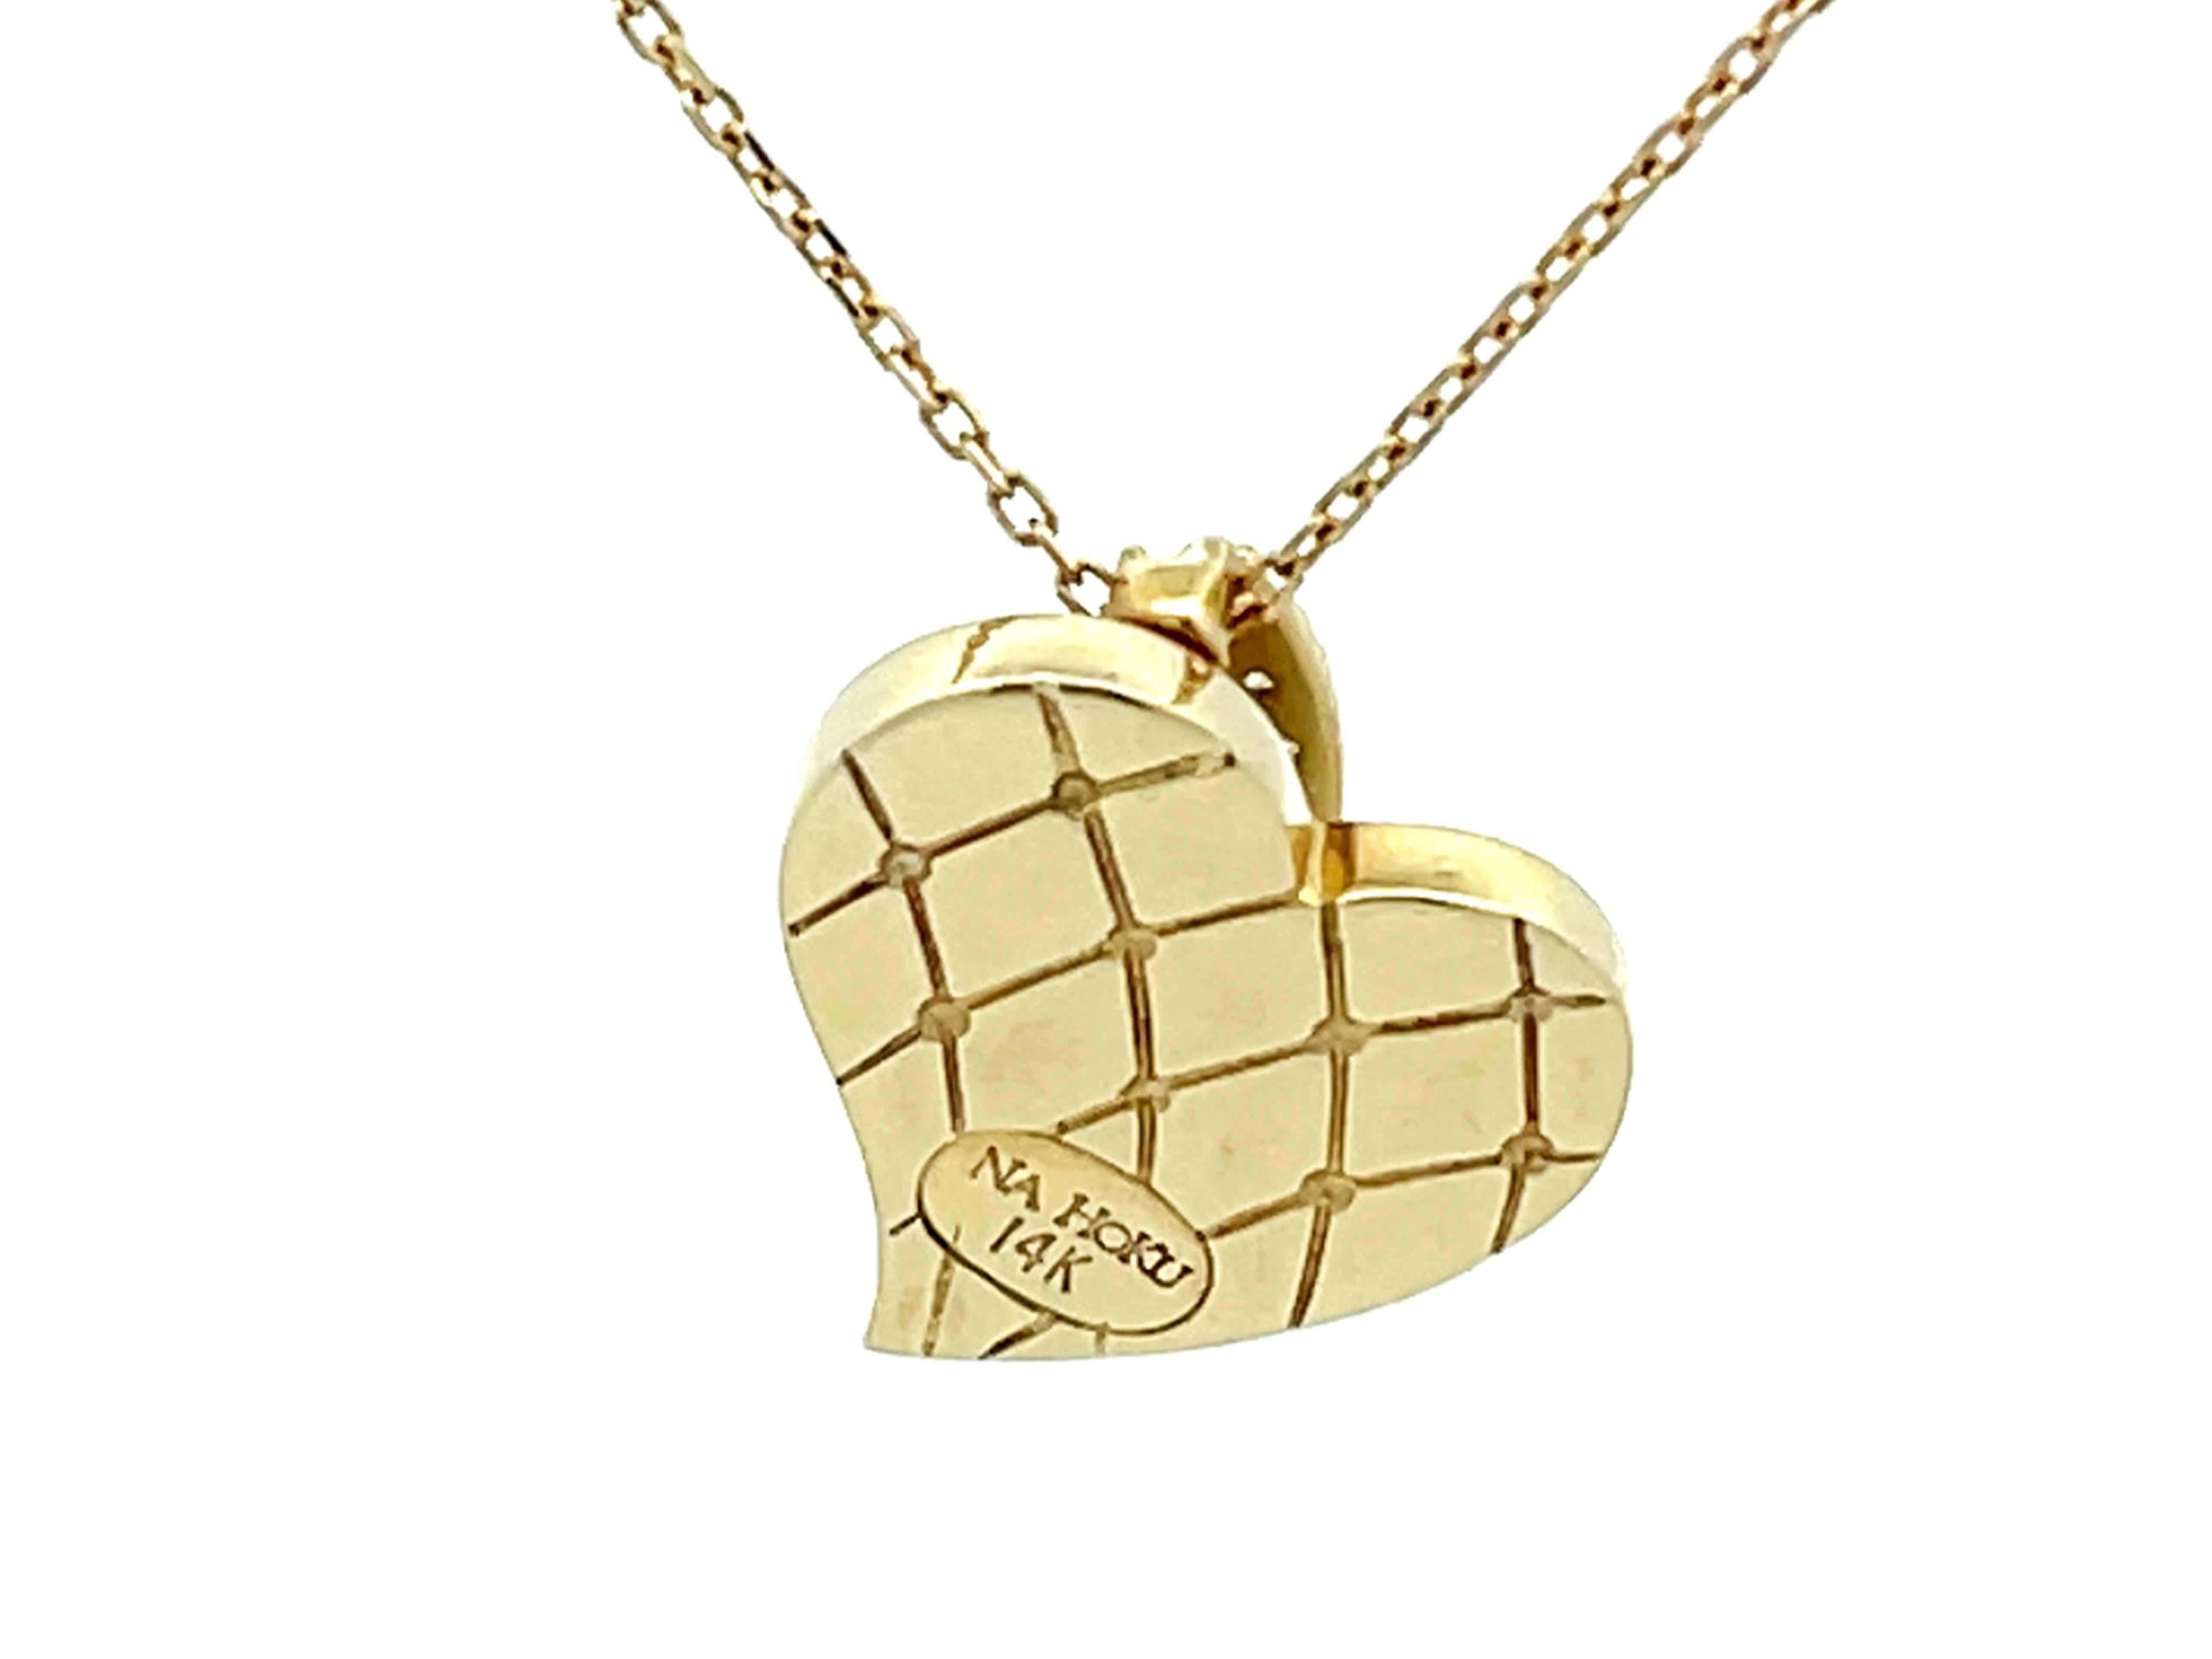 Brilliant Cut Na Hoku Diamond Heart Necklace in 14k Yellow Gold For Sale